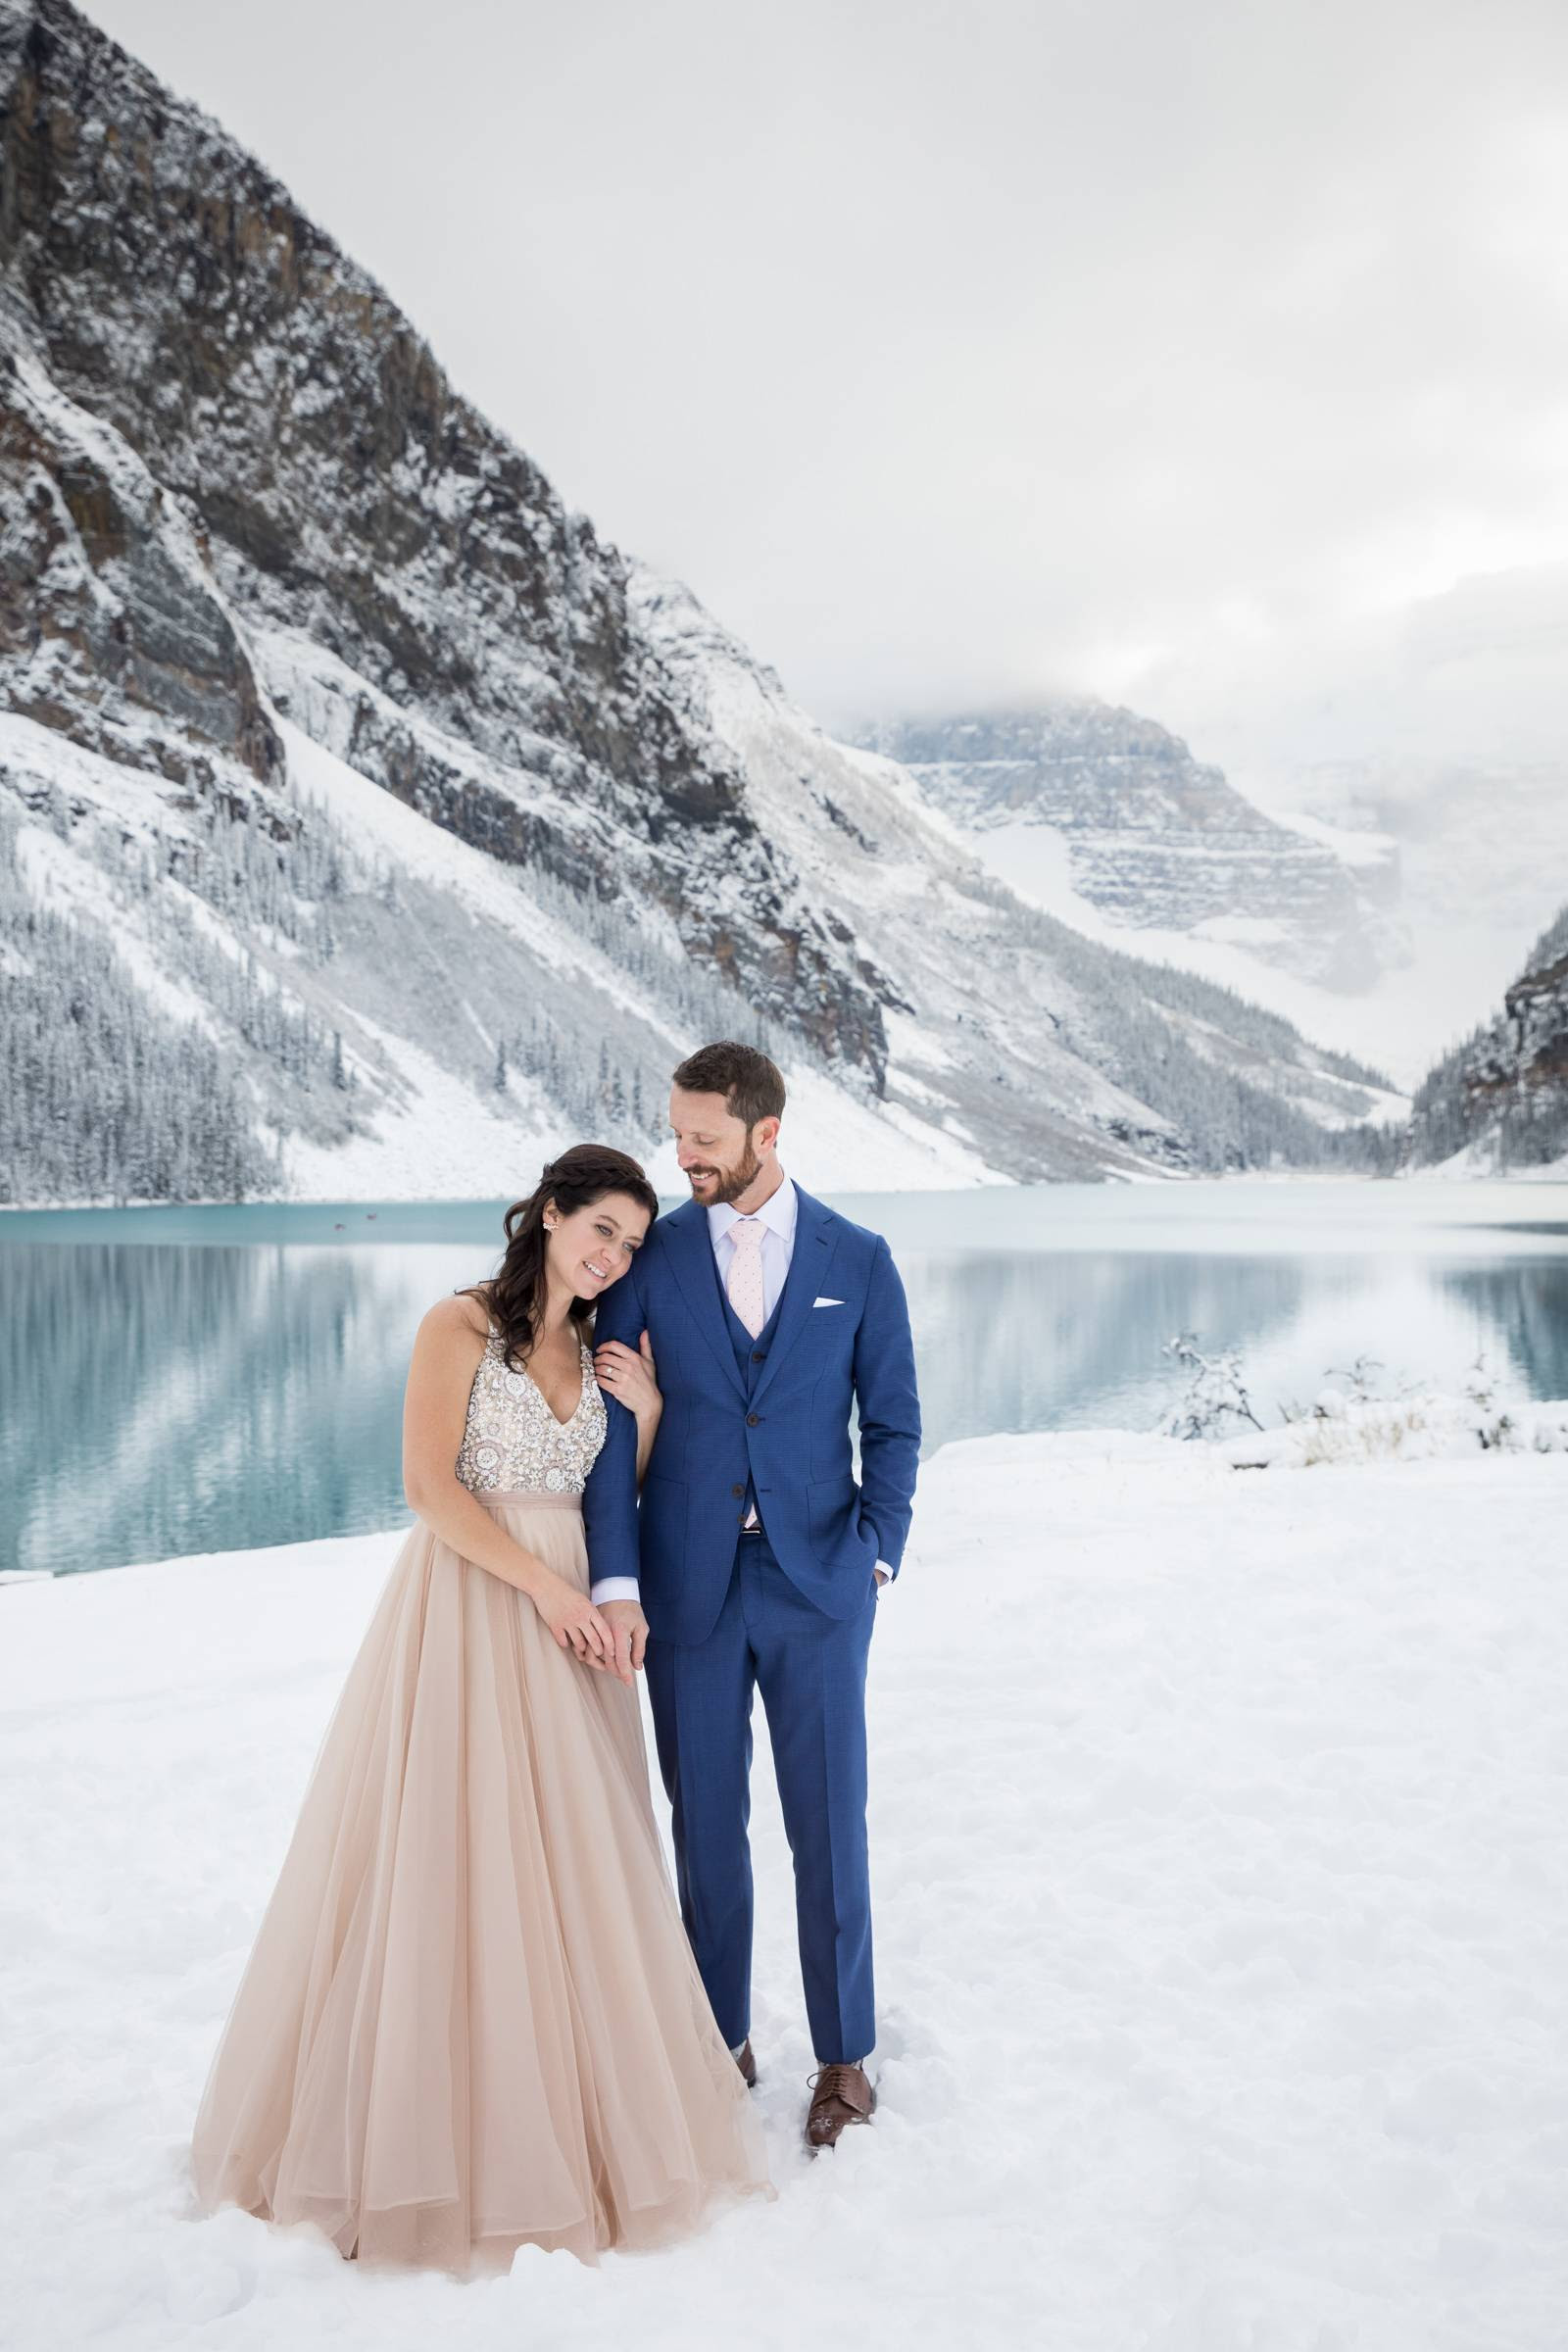 A bold, beautiful color palette of pink and purple, details inspired by the literary classic, and chic, elegant style combine to create a wedding look that would be perfect for a springtime wedding… Lake Louise Winter Wonderland Wedding Lake Louise Wedding Photographer Lake Louise Item 30